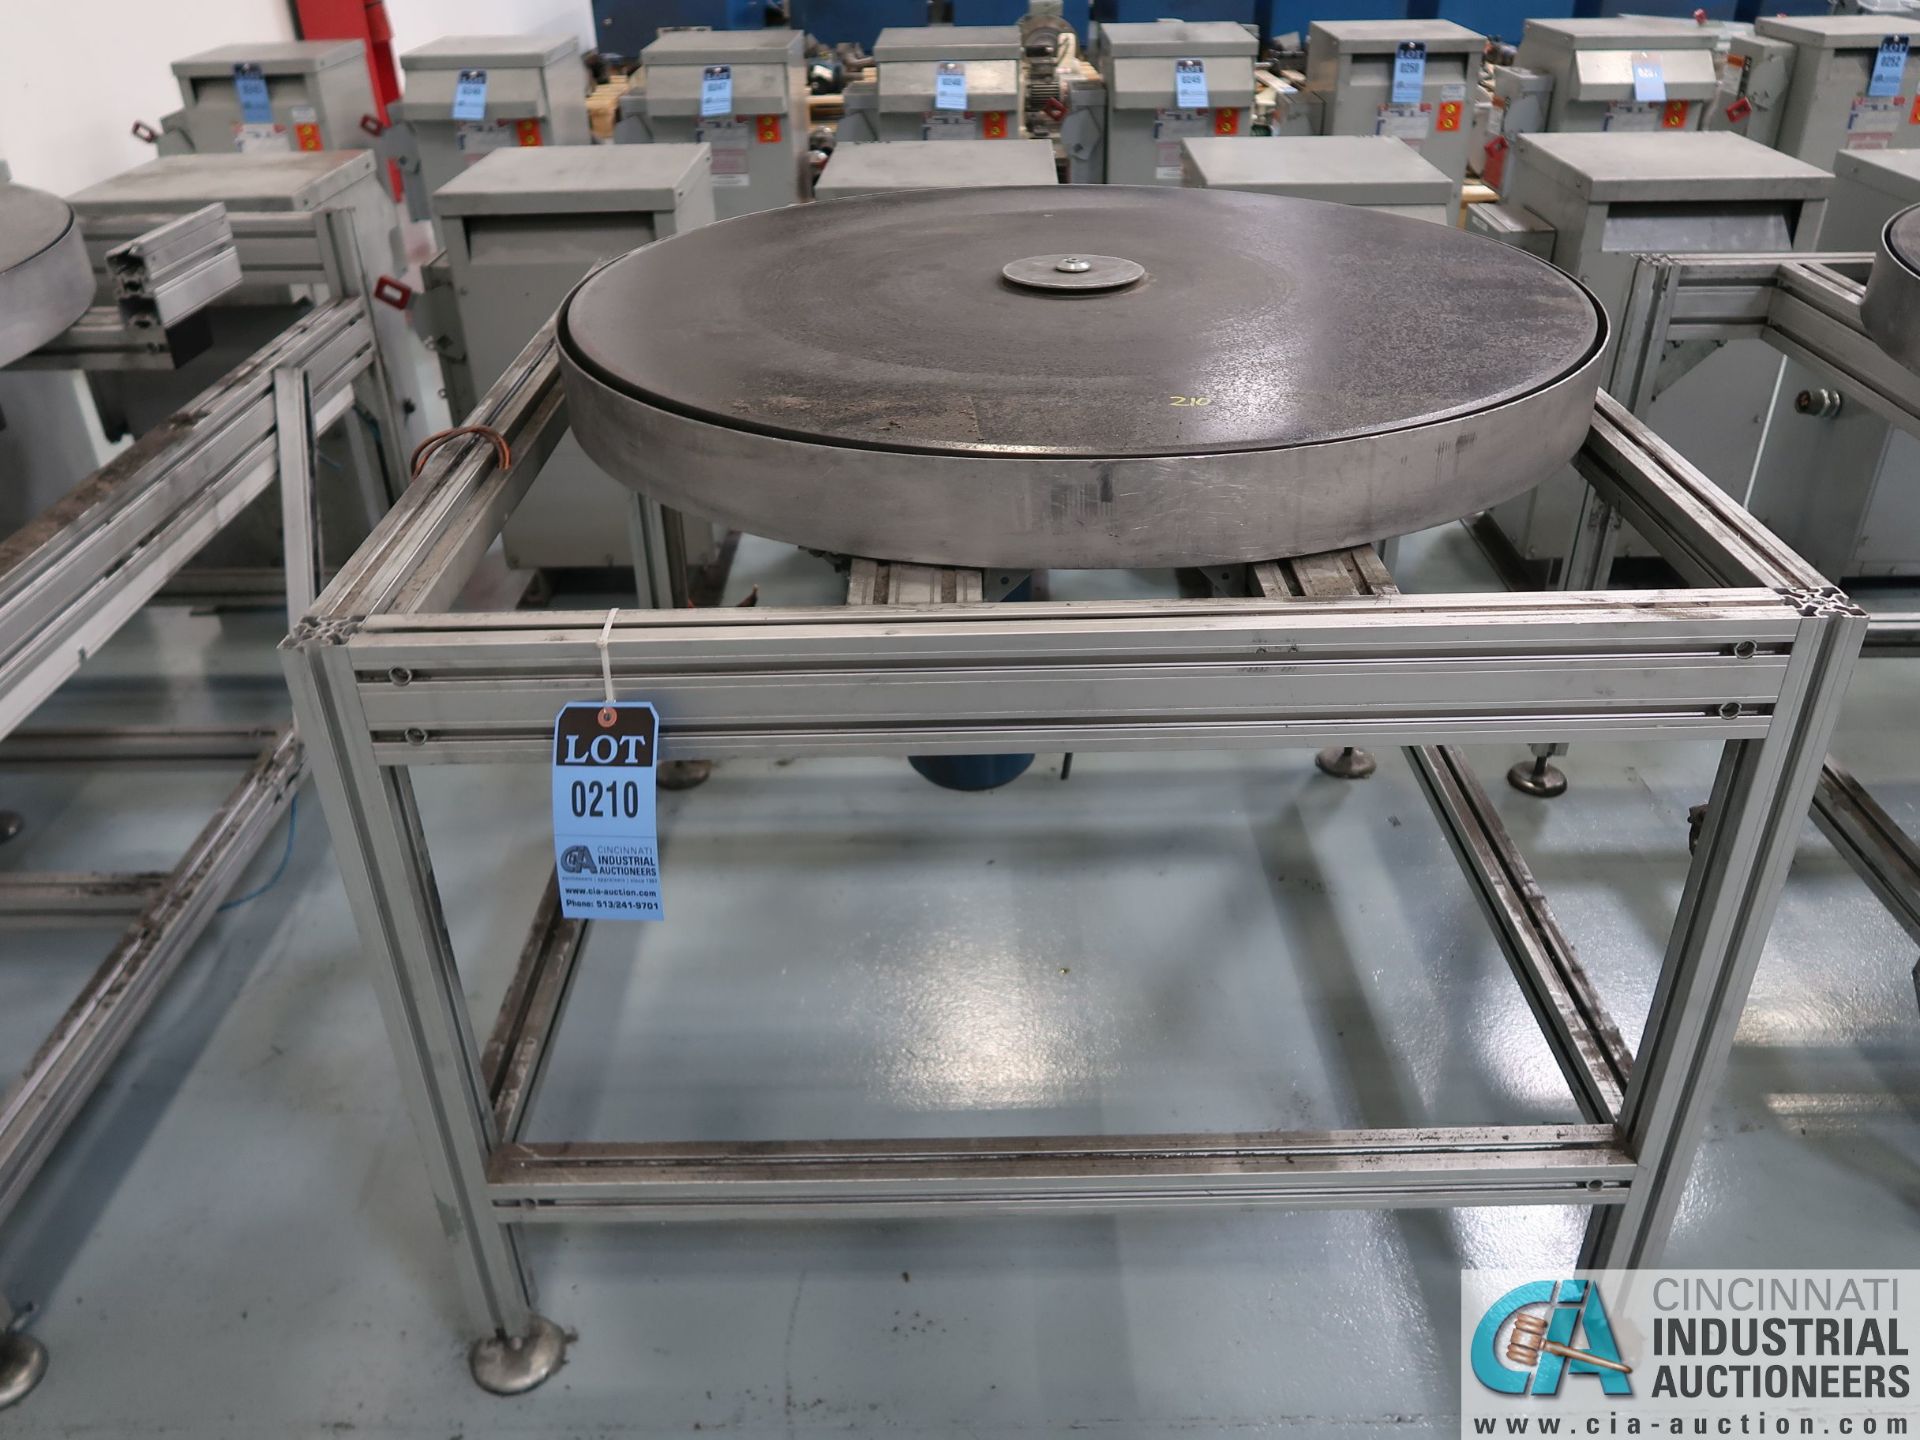 40" DIA. STEEL TURNTABLE WITH ALUMINUM FRAME *$25.00 RIGGING FEE DUE TO INDUSTRIAL SERVICES AND SAL